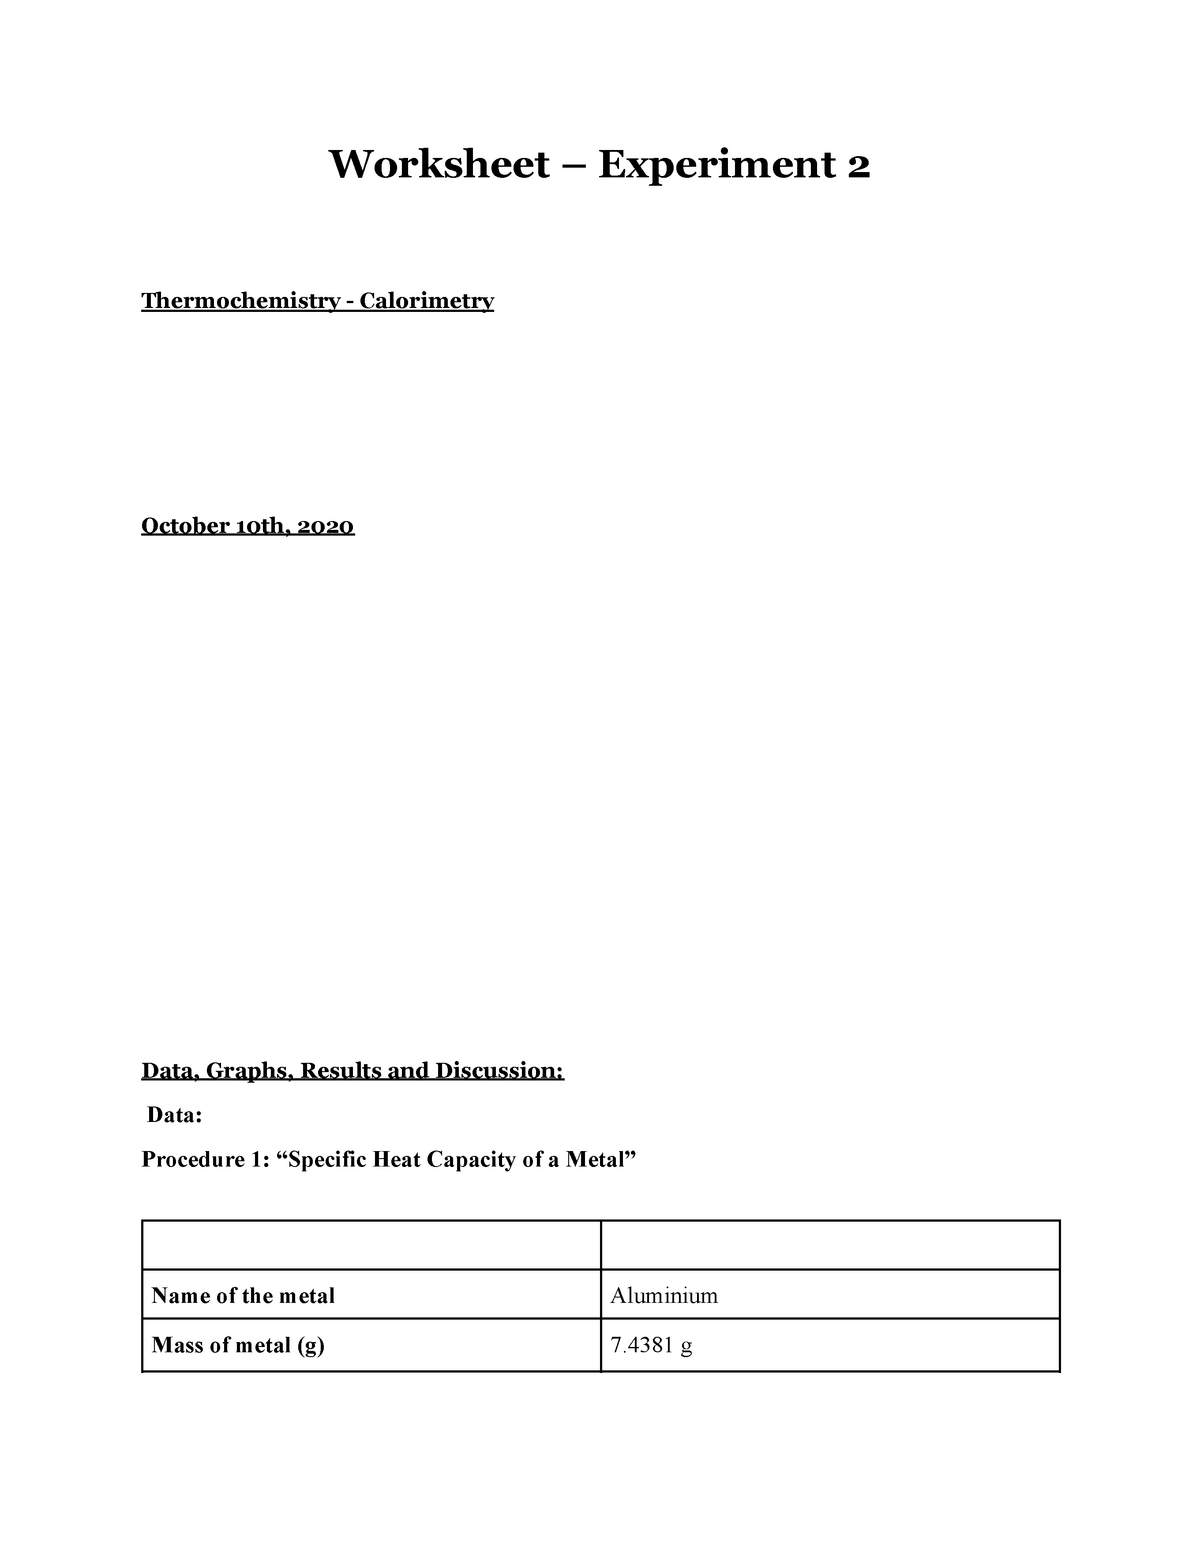 lab-2-chm1311-grade-a-worksheet-experiment-2-thermochemistry